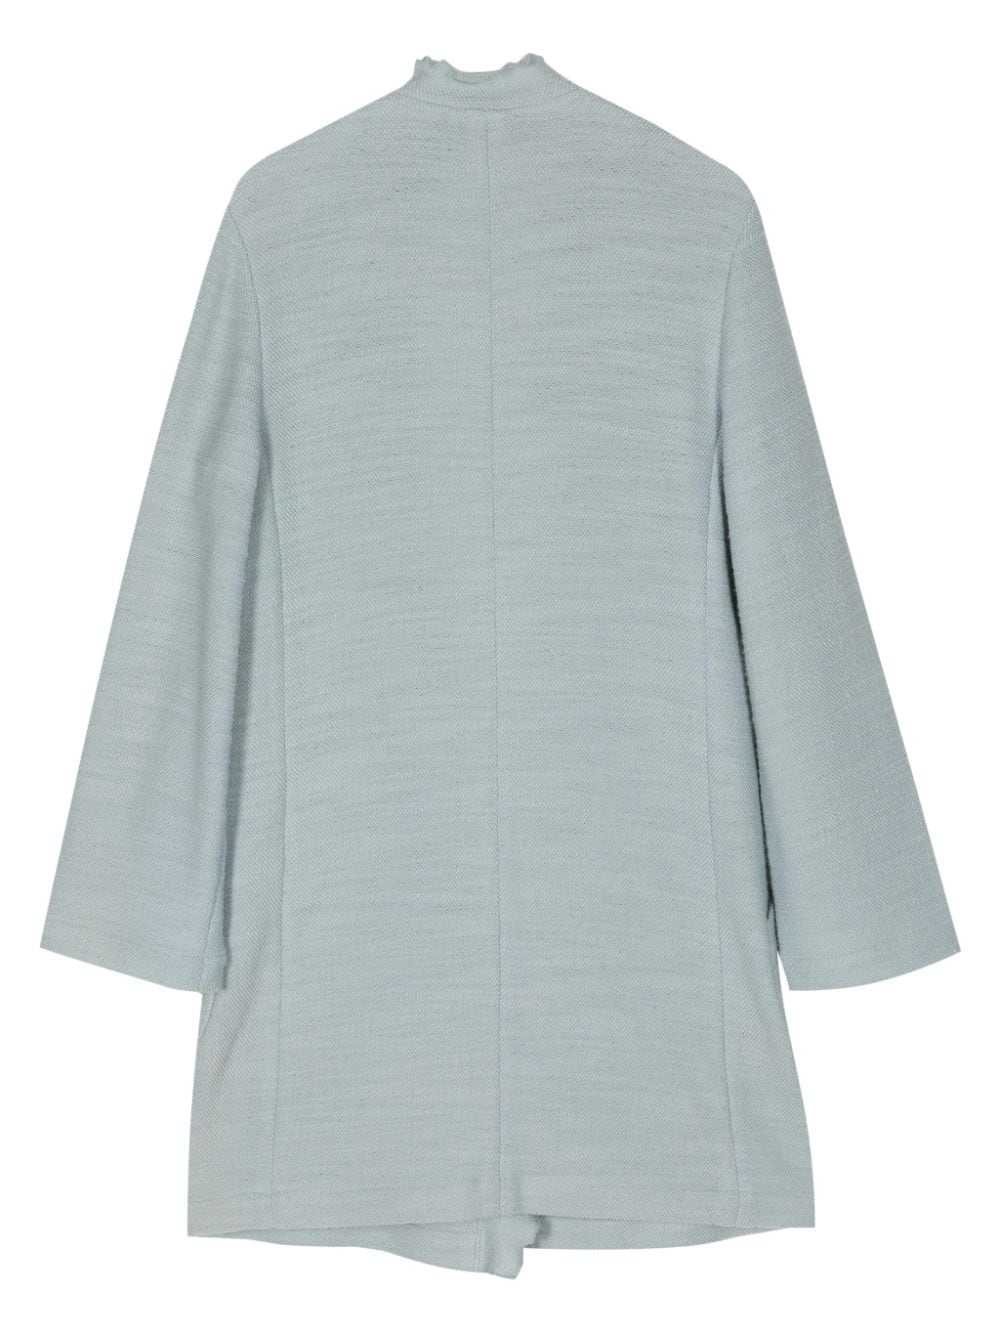 CHANEL Pre-Owned 1998 ruffled long cardigan - Blue - image 2